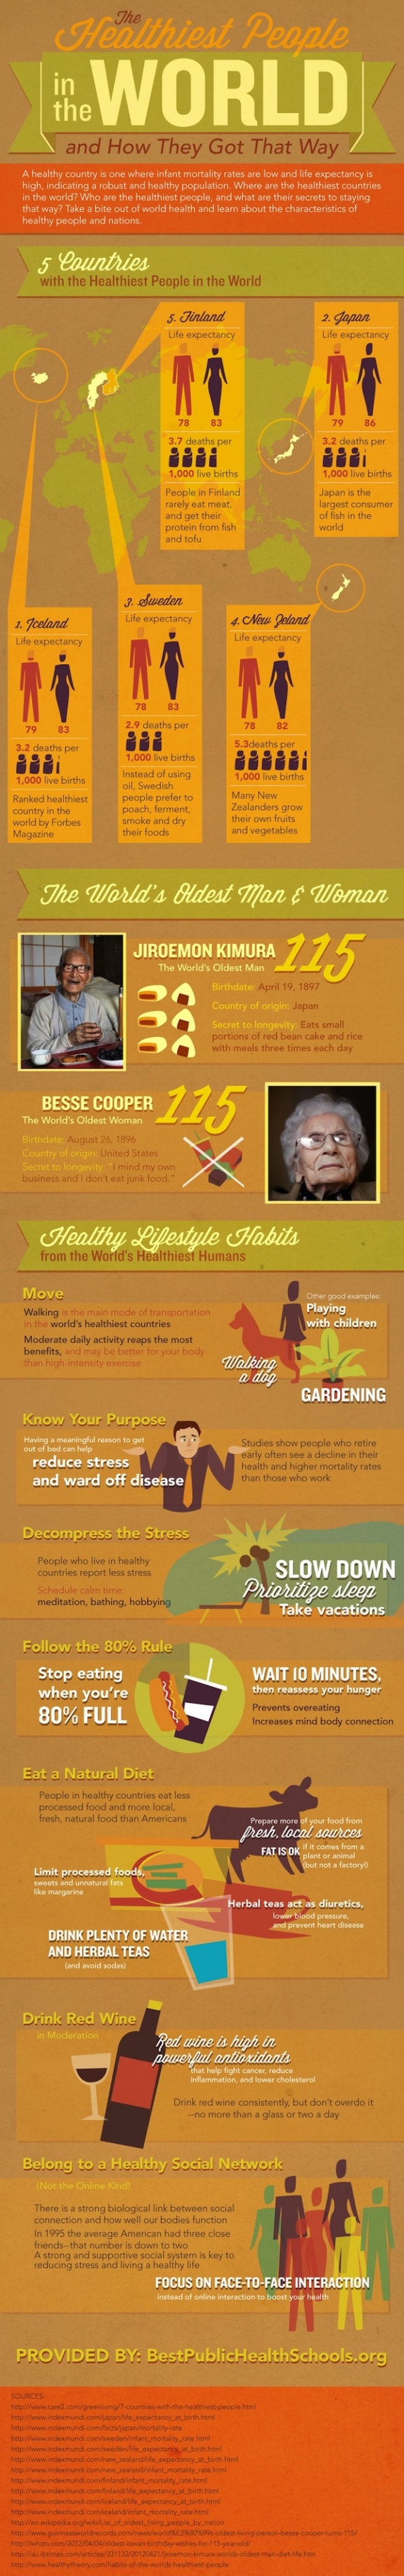 The World’s Healthiest People: Their Diet And Lifestyle Secrets Infographic